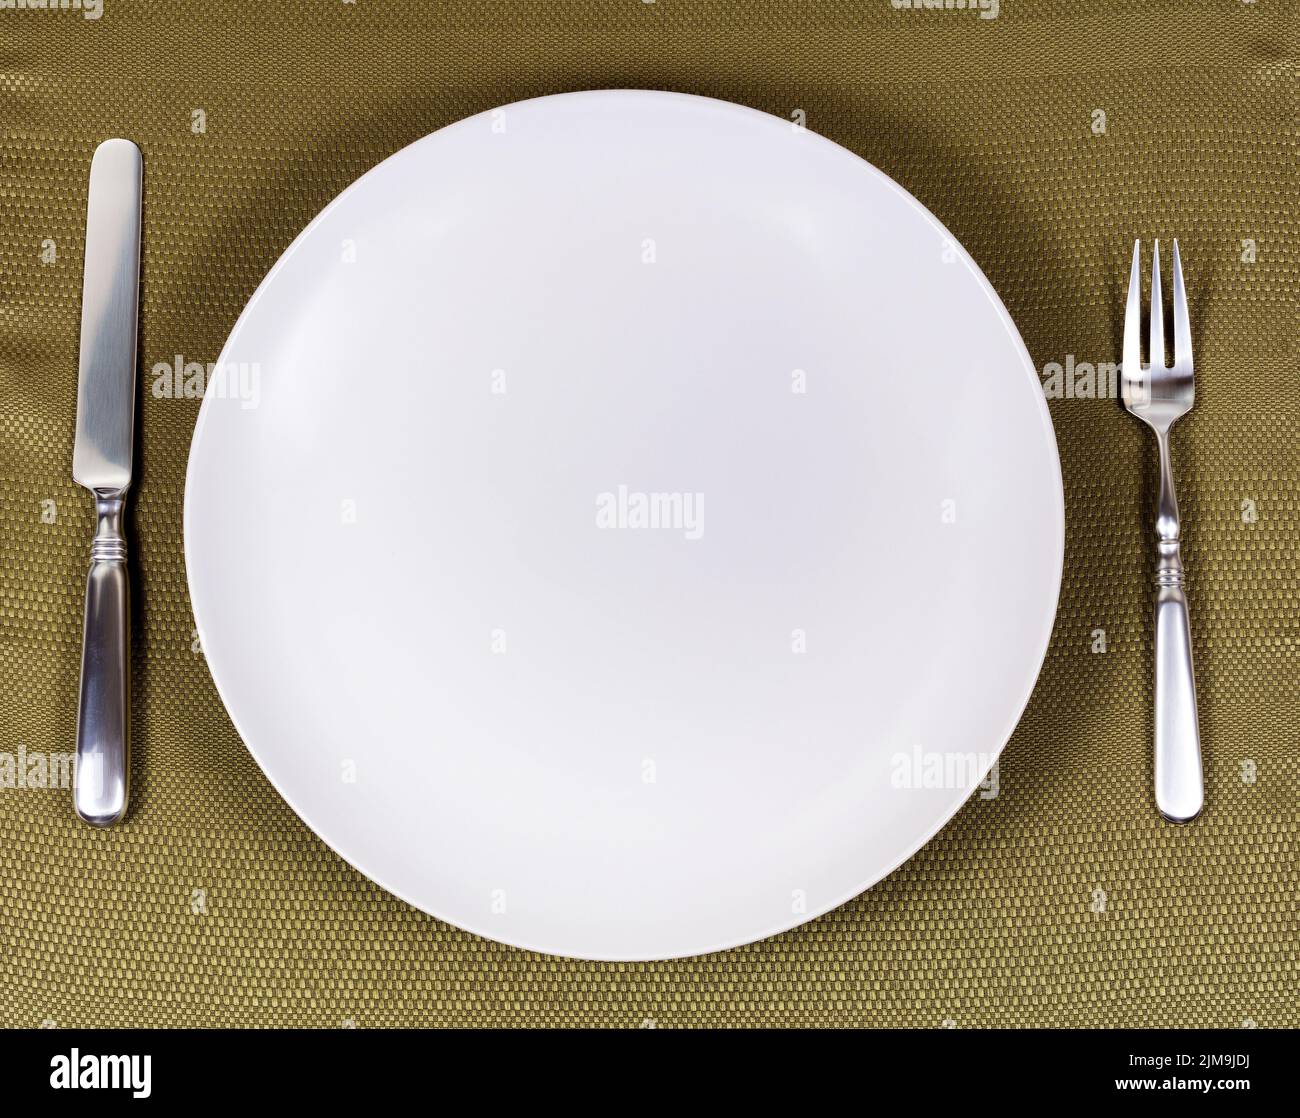 Simple white plate with silverware for dinner setting on table cloth Stock Photo